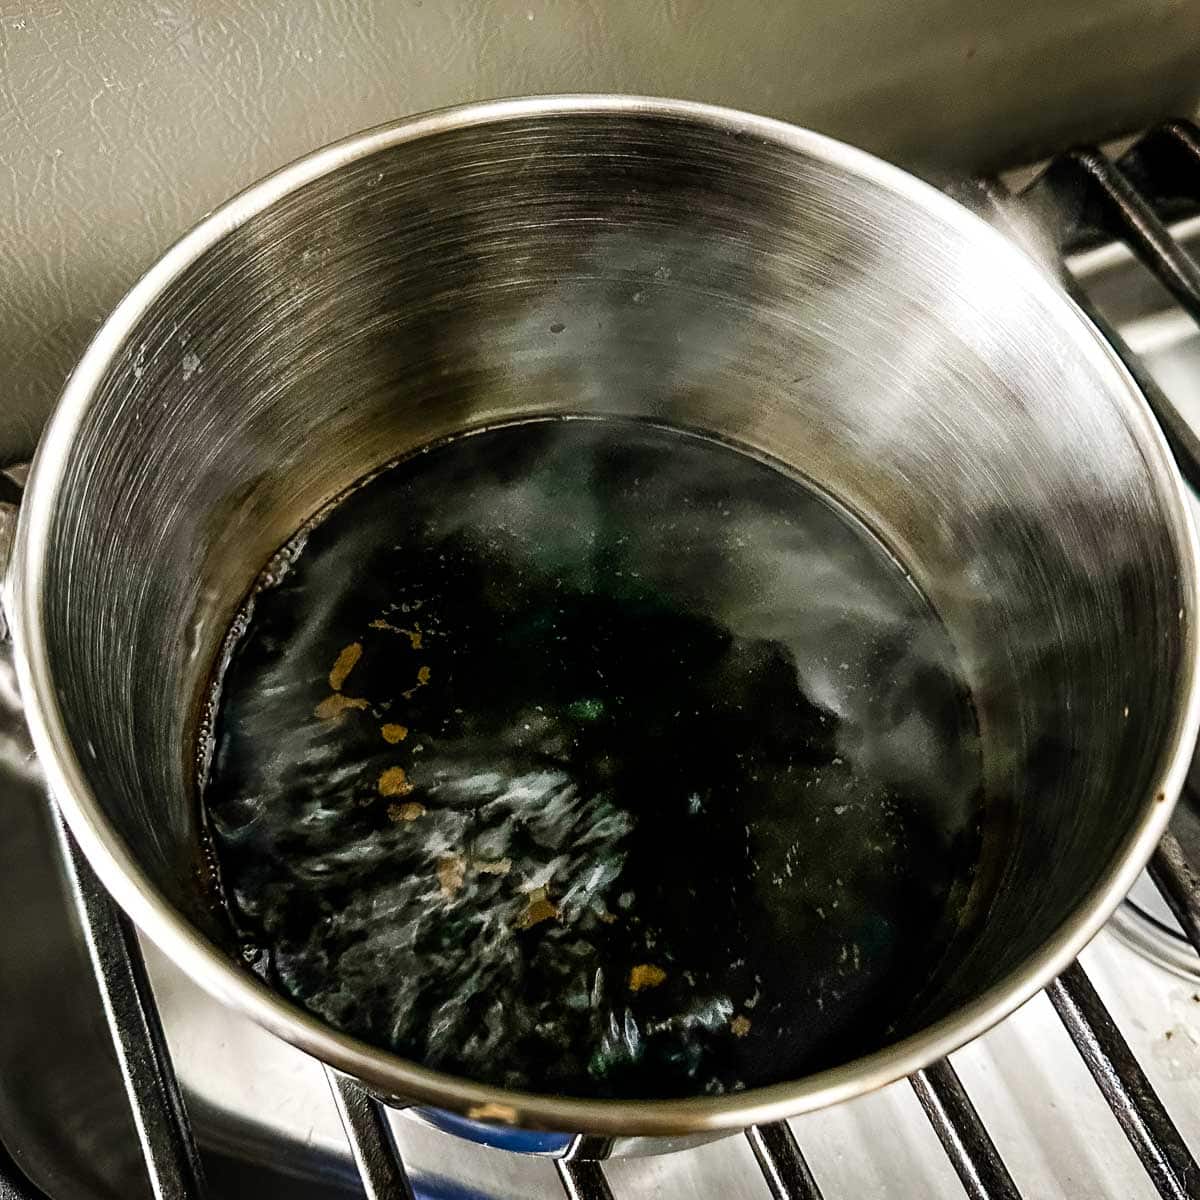 Balsamic vinegar reduces in a stainless steel pot.